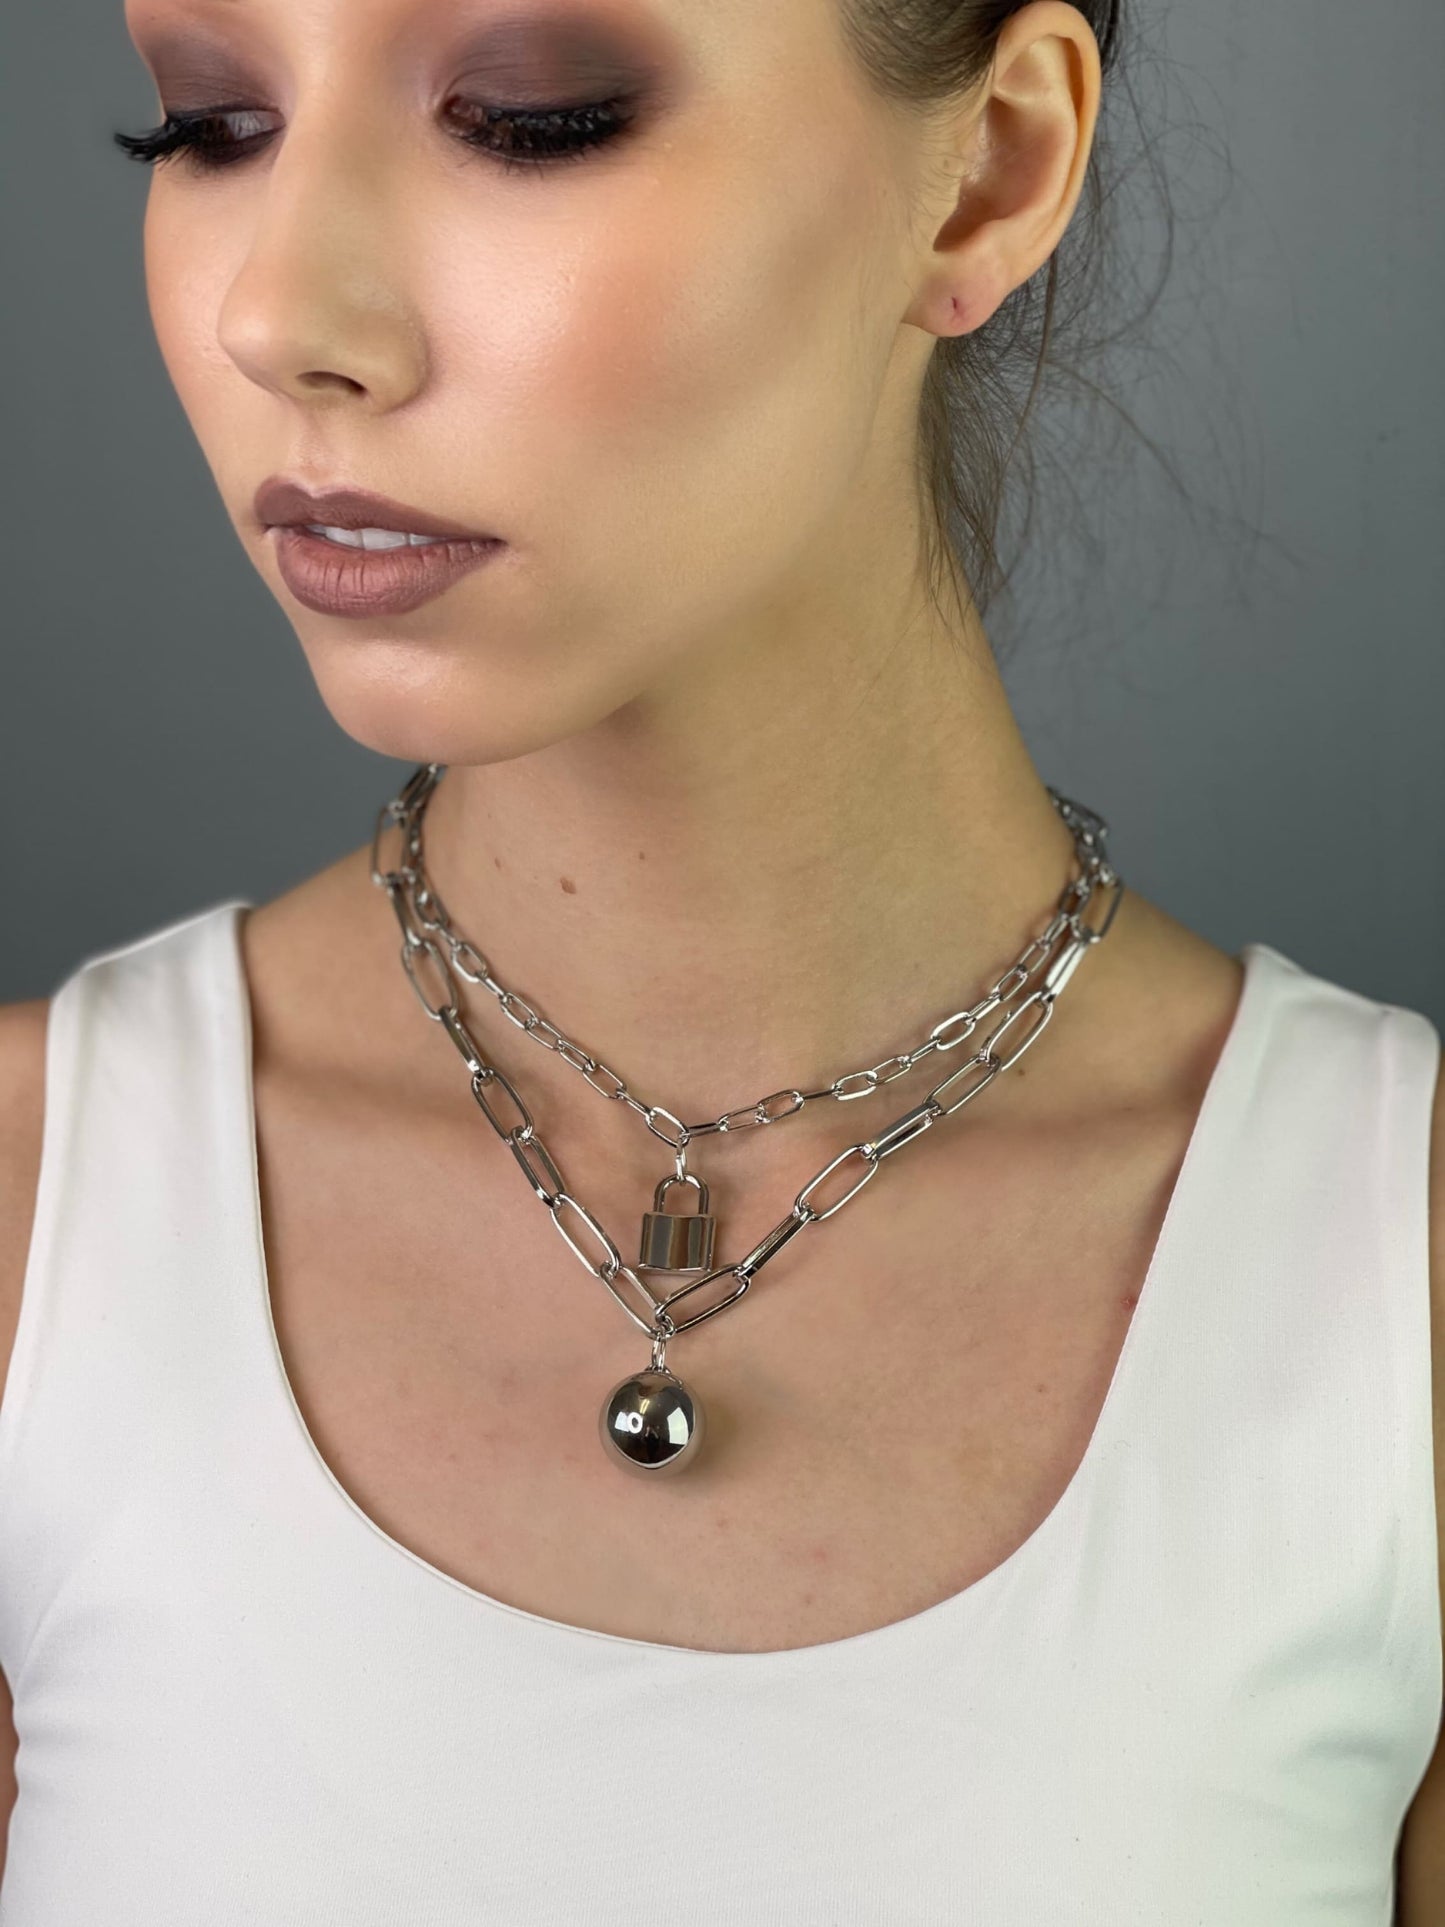 Chain necklace with ball and lock pendants